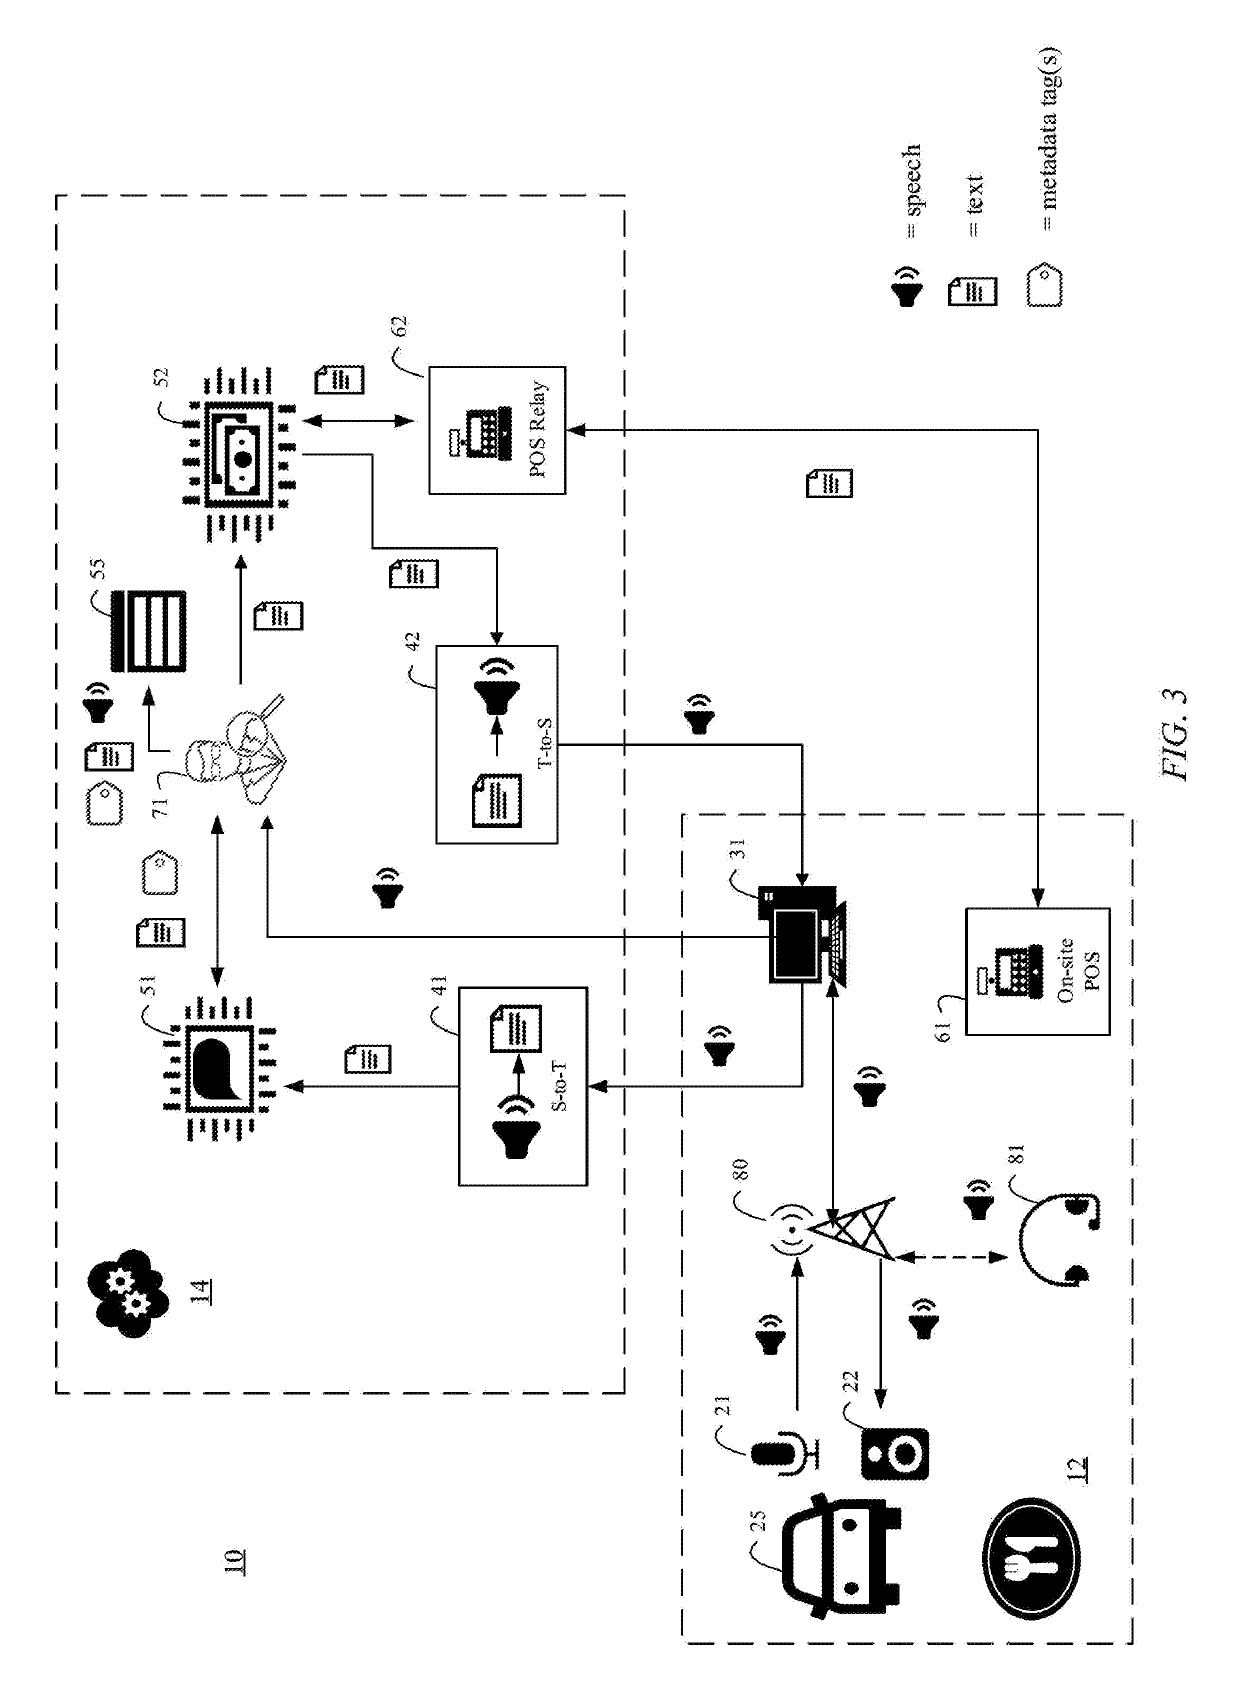 Artificially intelligent order processing system